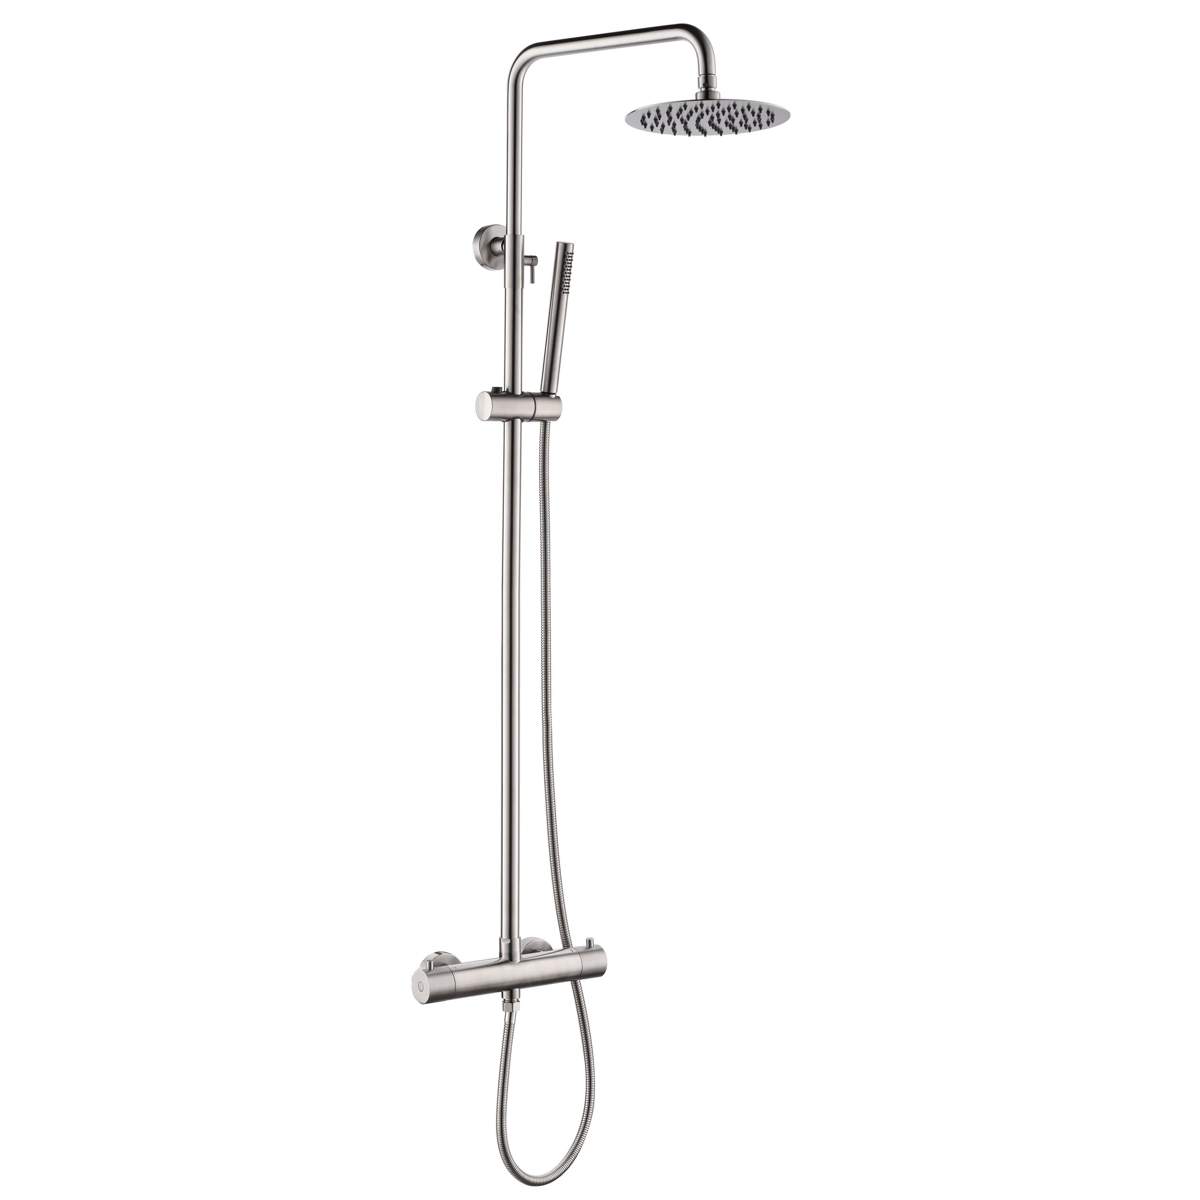 JTP Inox Thermostatic Bar Valve with 2 Outlets, Adjustable Riser and Shower Kit (IX52819)